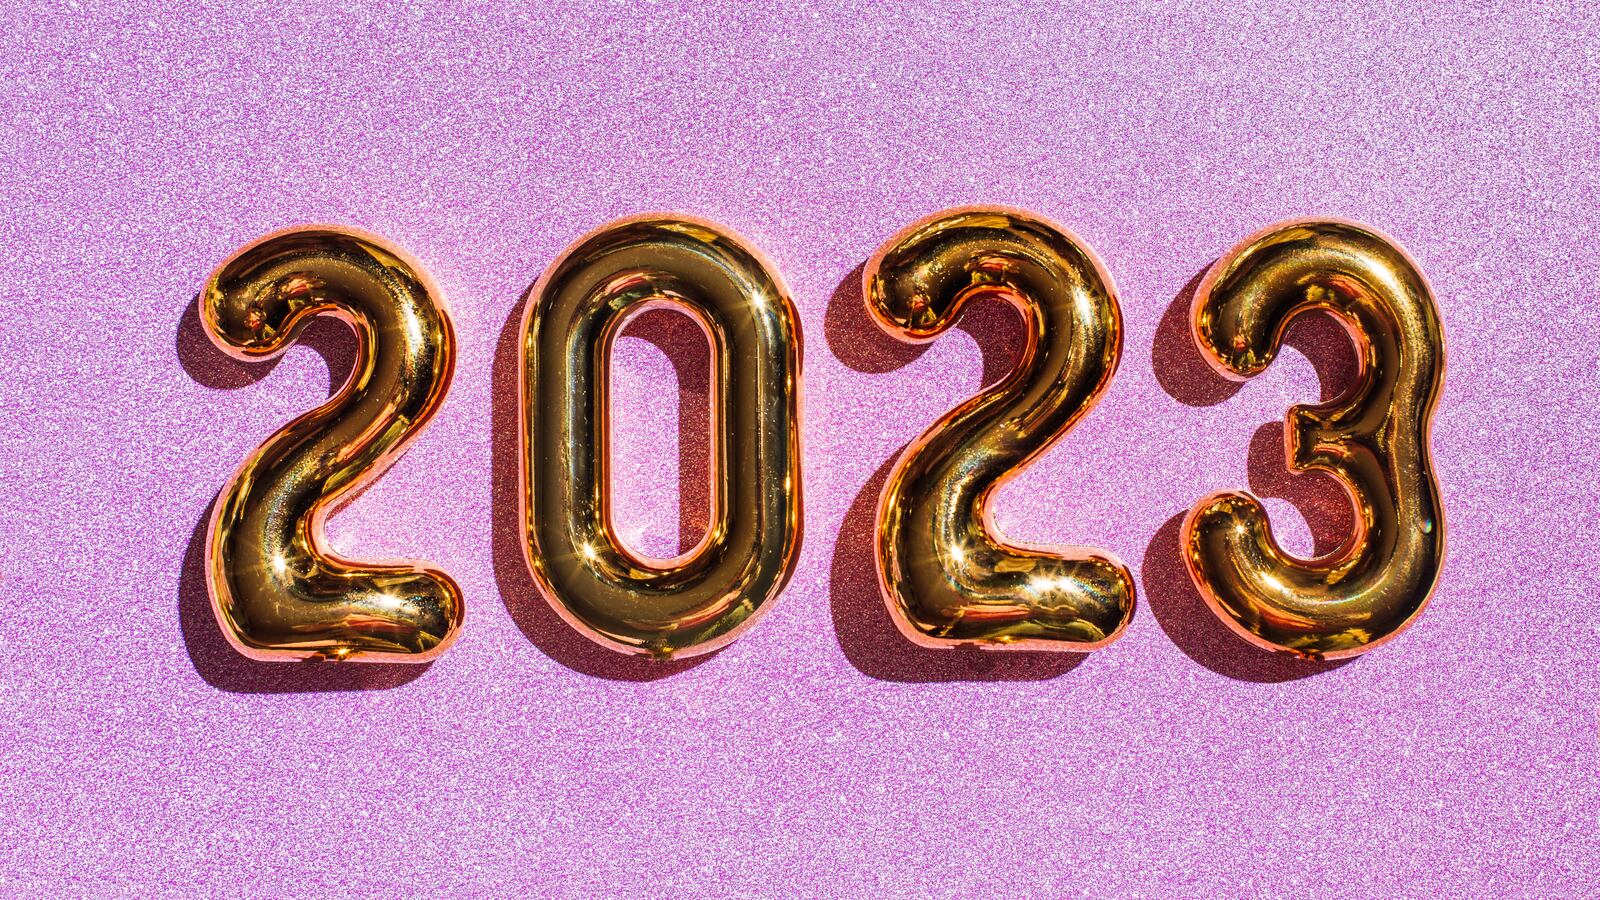 Numbered gold balloons showing 2023 on a pink glittery background.